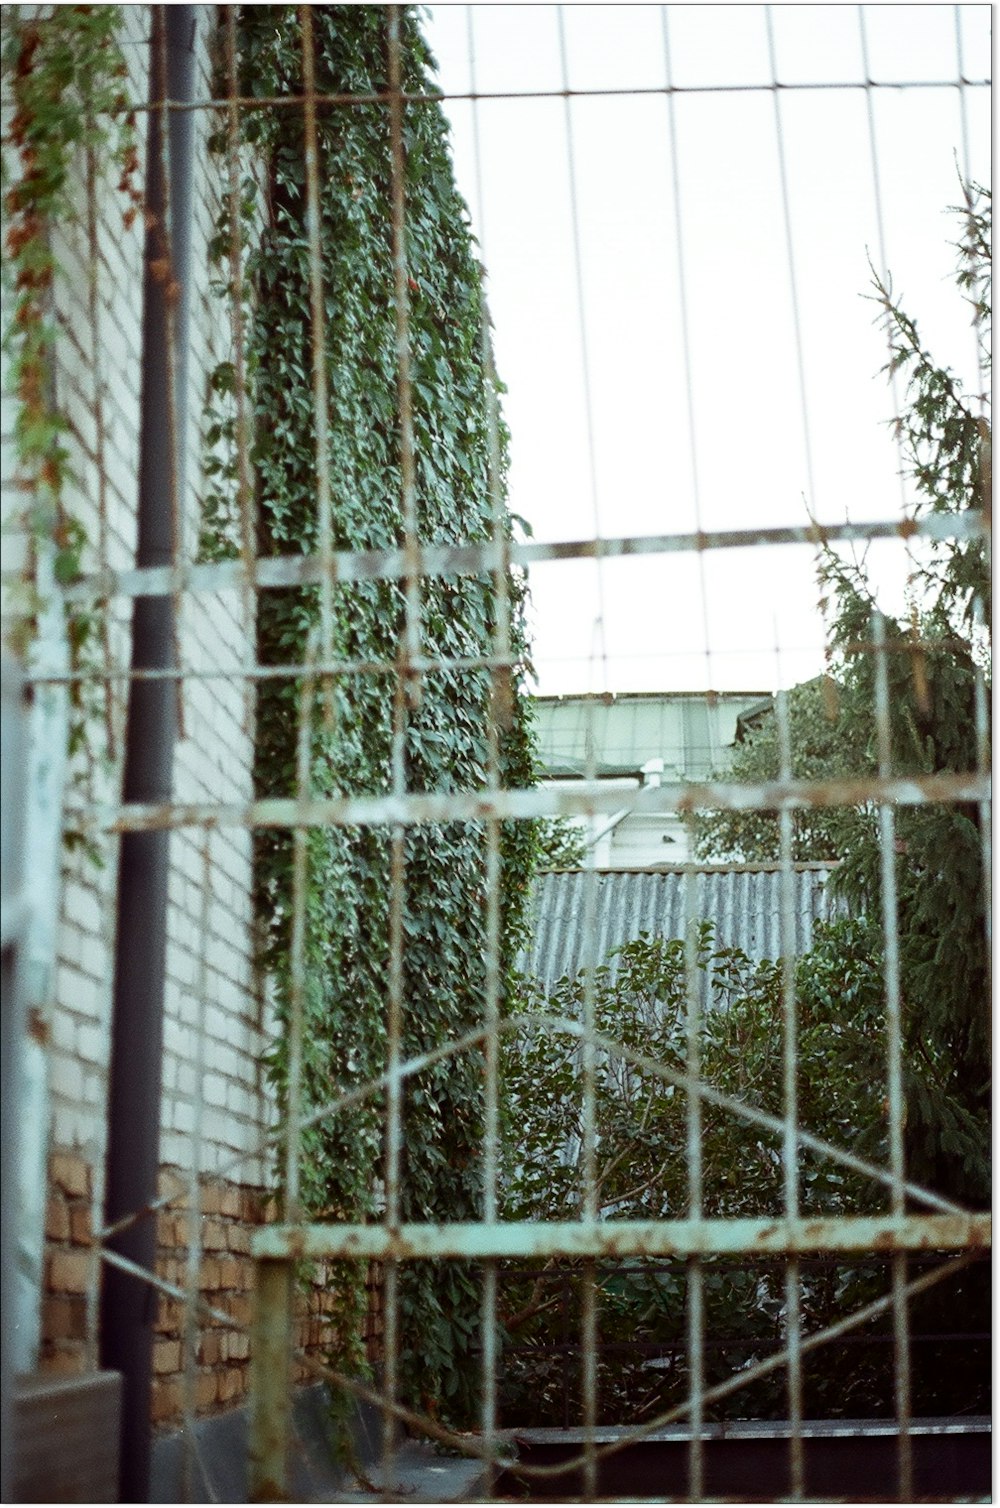 a view of a building through a fence